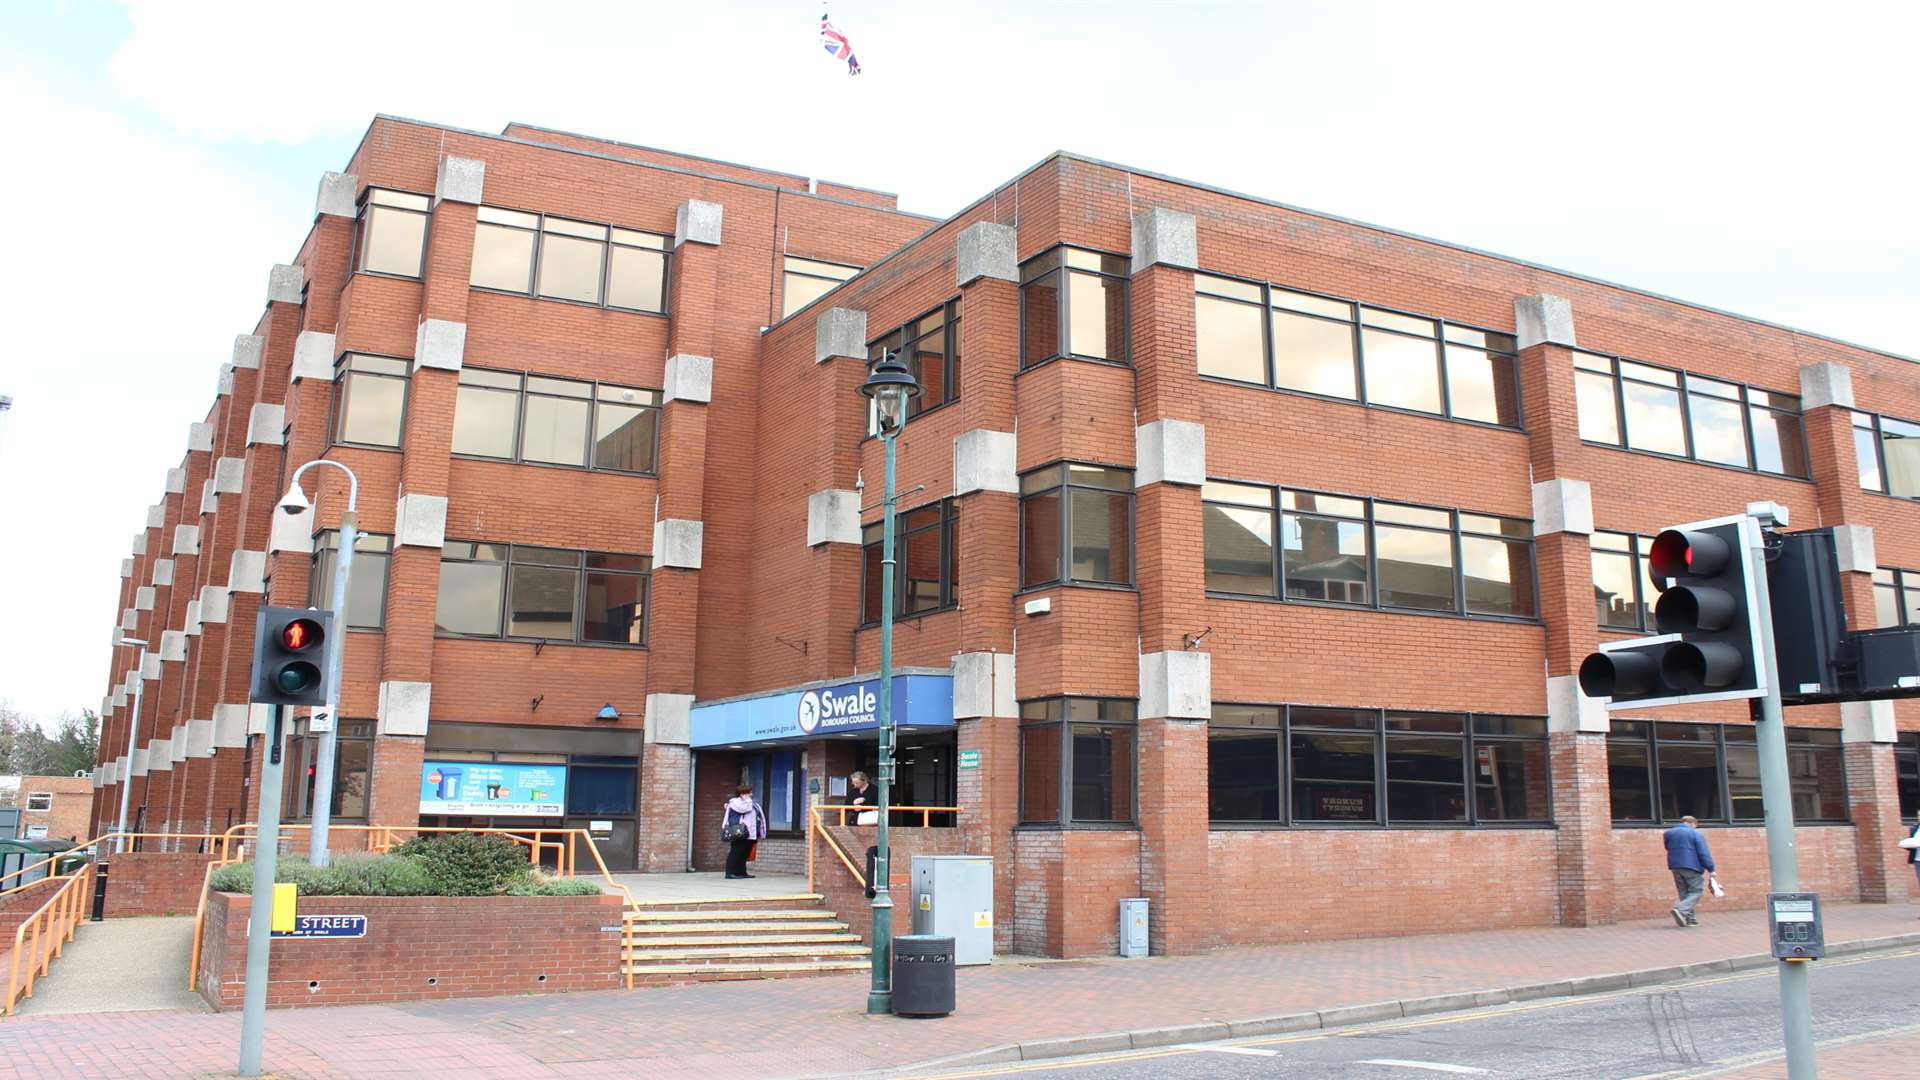 Swale House, headquarters of Swale Borough Council in East Street, Sittingbourne